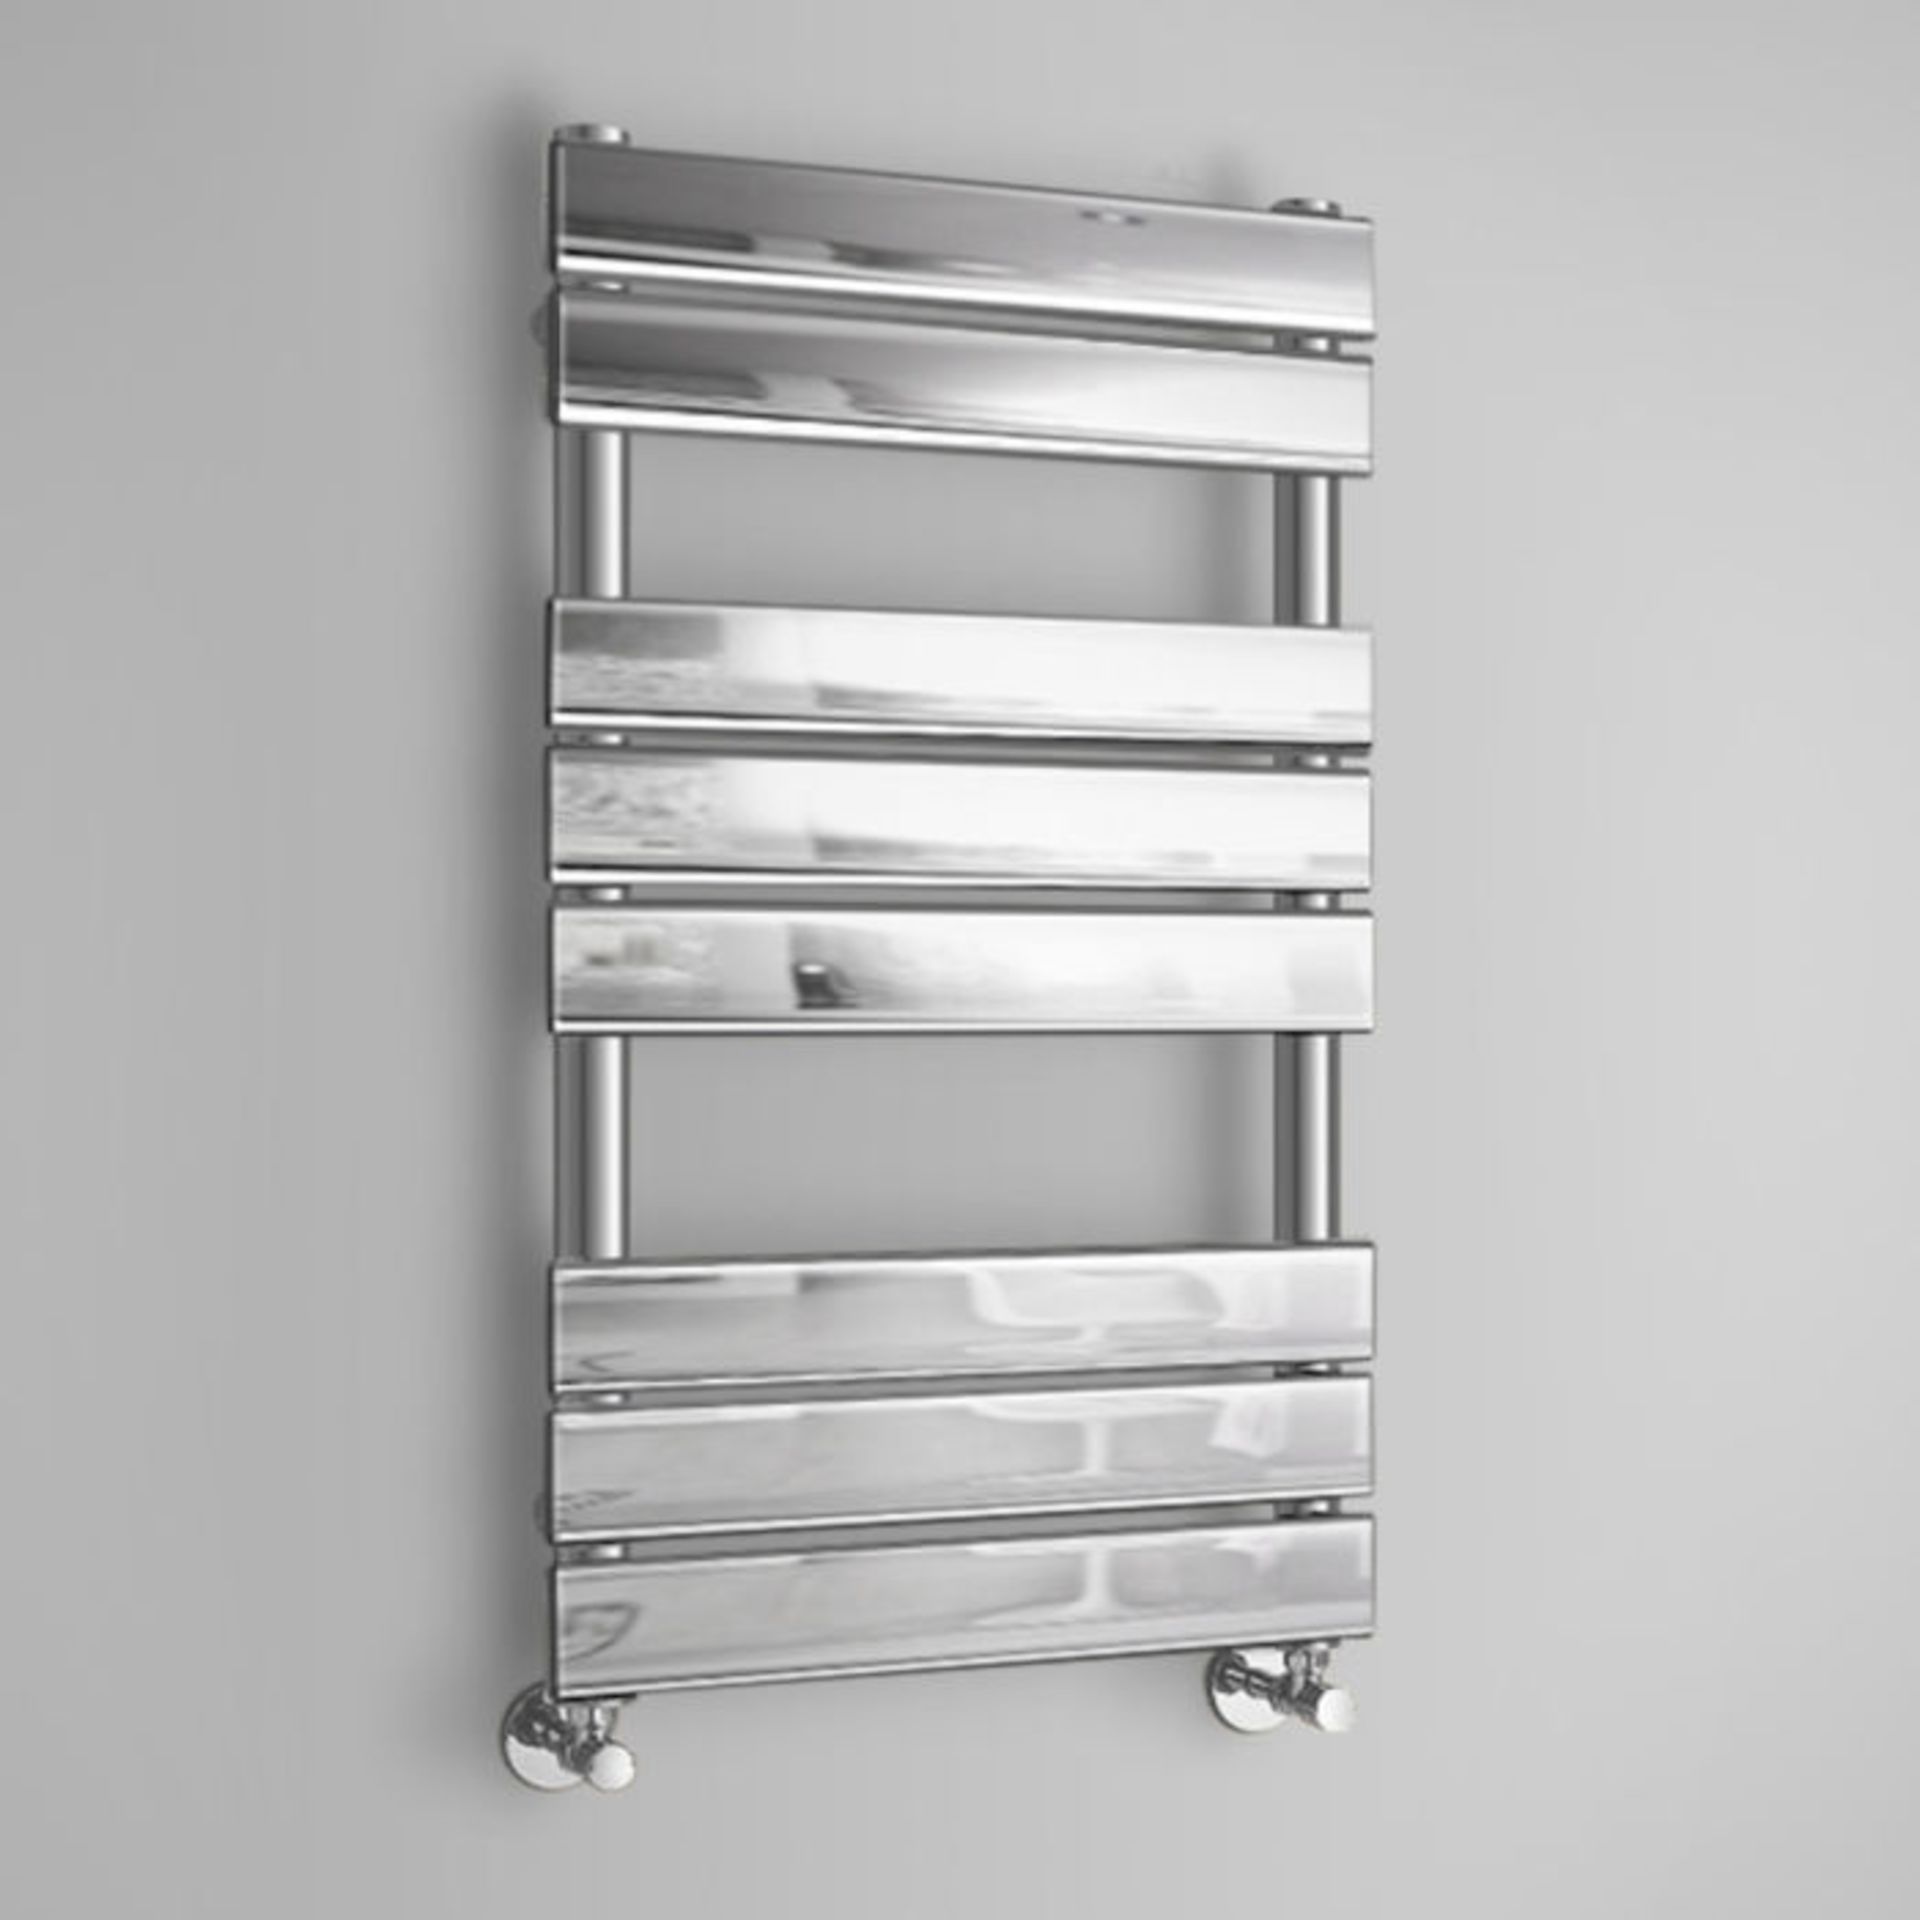 (G5) 800x450mm Chrome Flat Panel Ladder Towel Radiator RRP £246.99 Low carbon steel chrome plated - Image 2 of 6